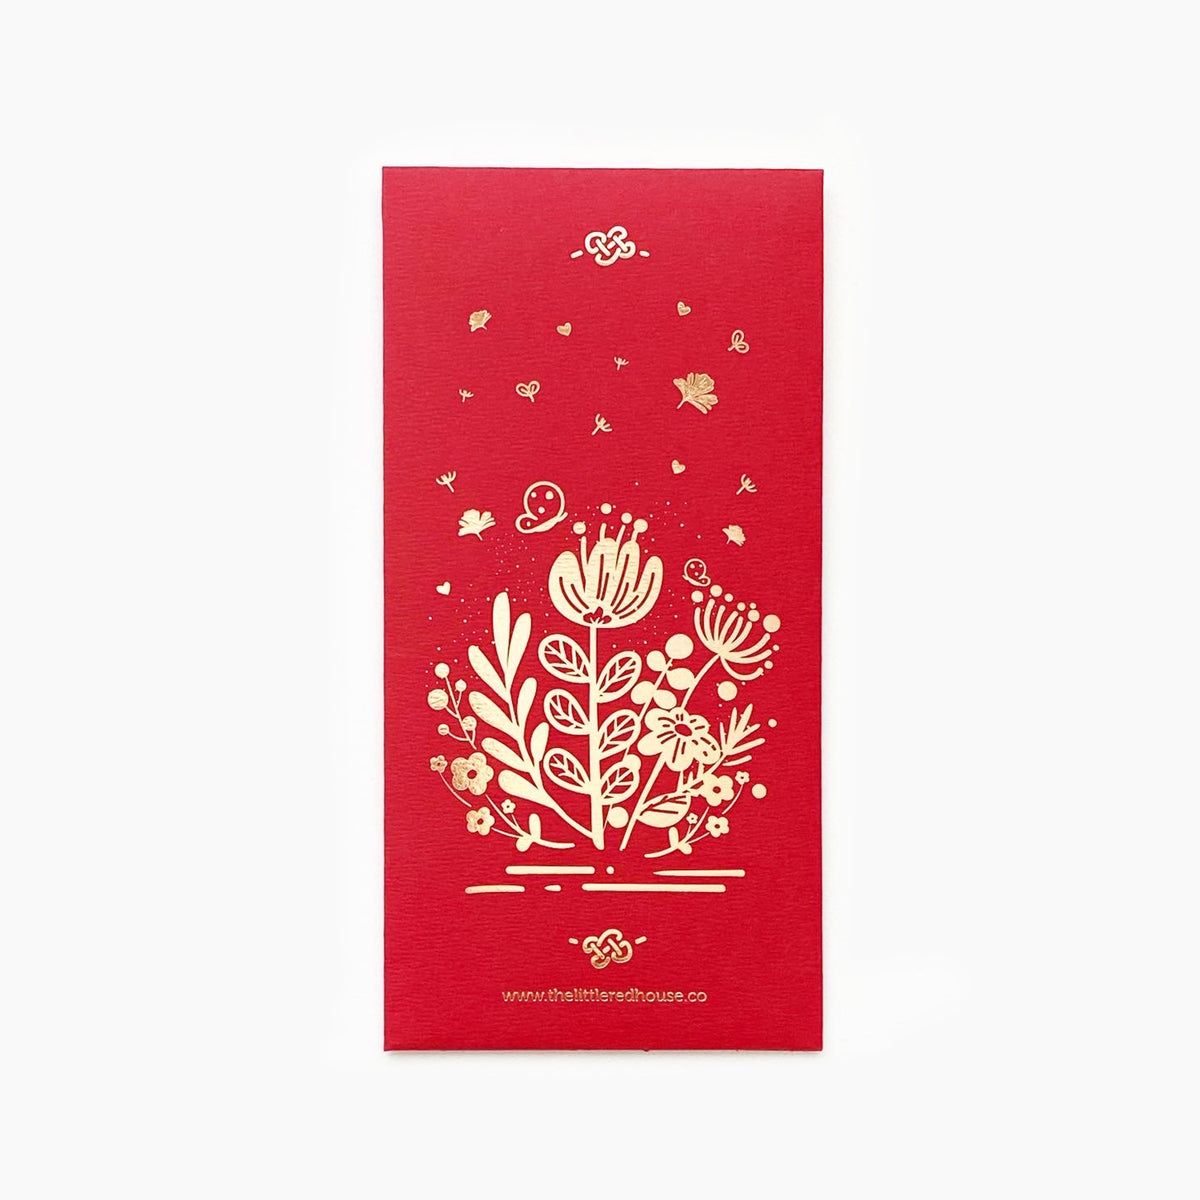 Red envelope design, Red packet, Chinese new year design